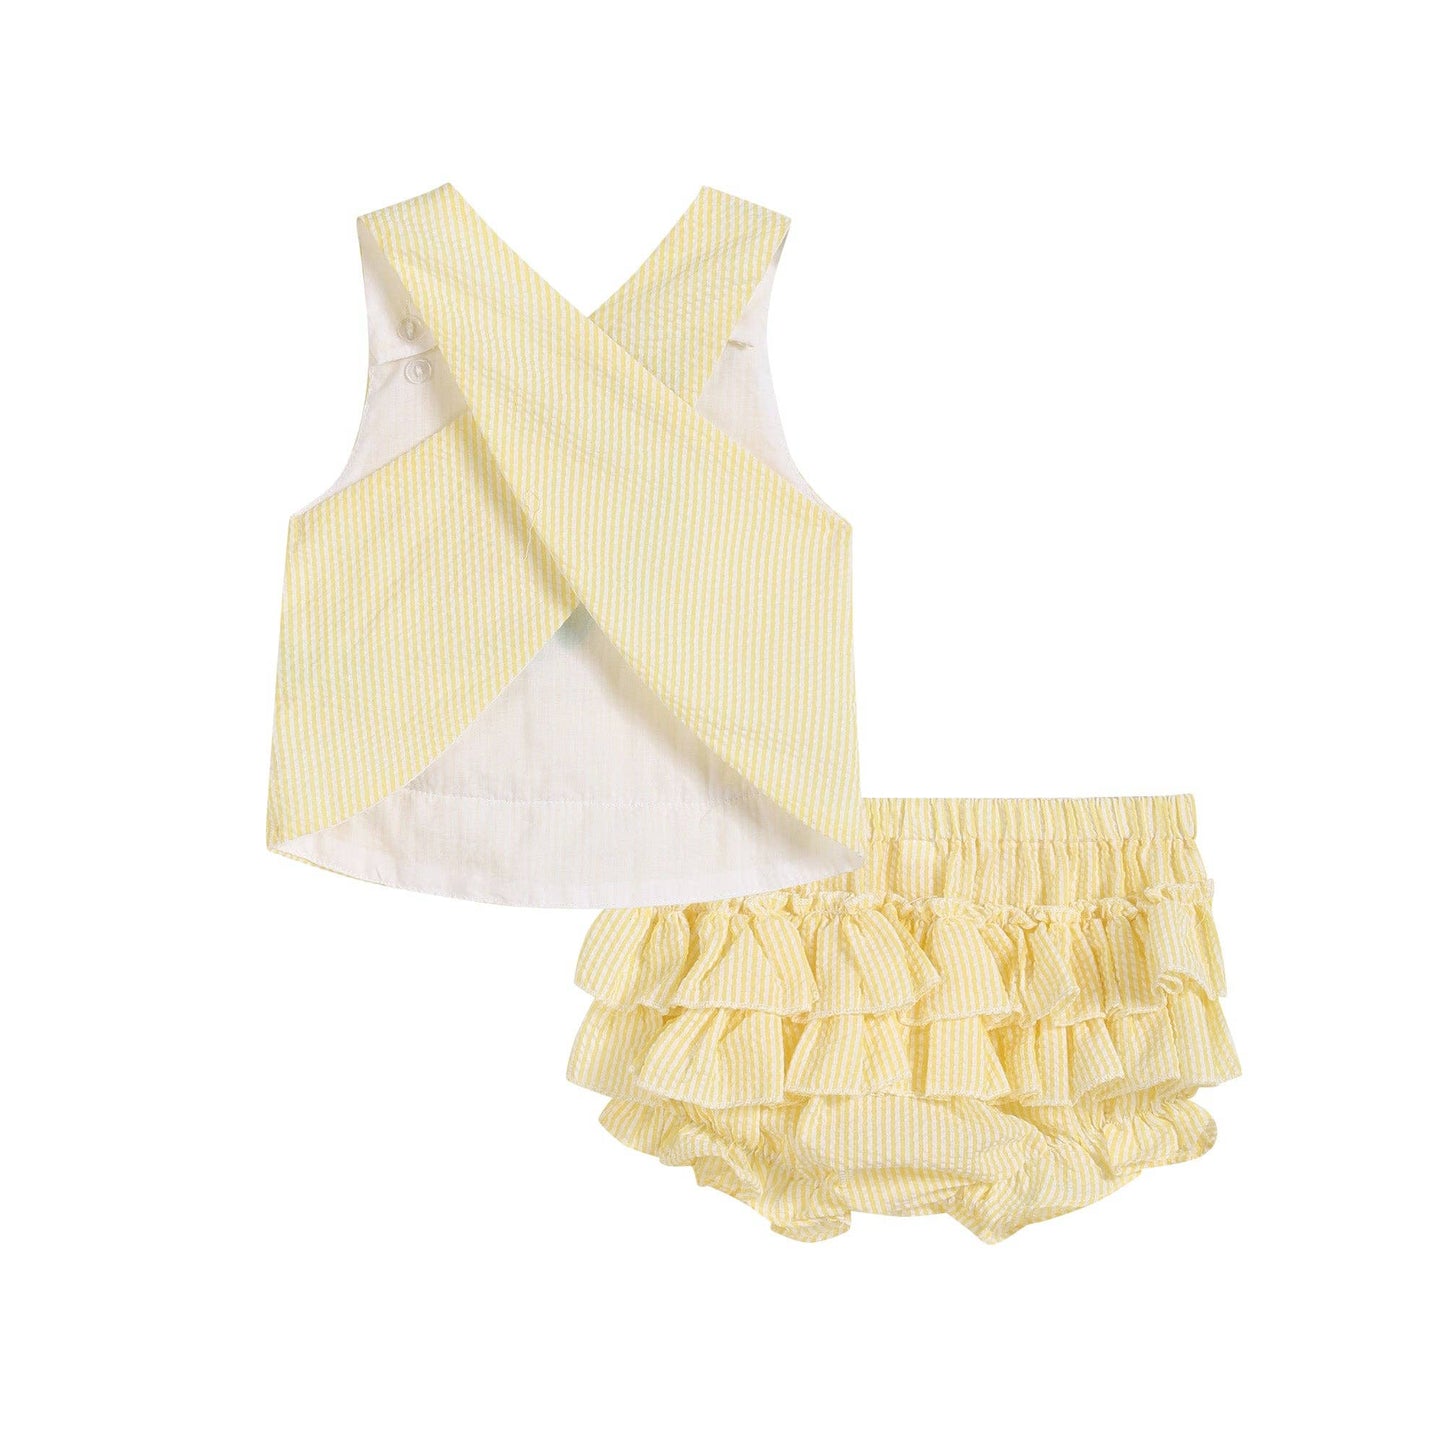 An adorable Yellow Seersucker Turtle 2pc Baby Bloomer Set: 12-18M by Lil Cactus in soft cotton with ruffled bottoms.